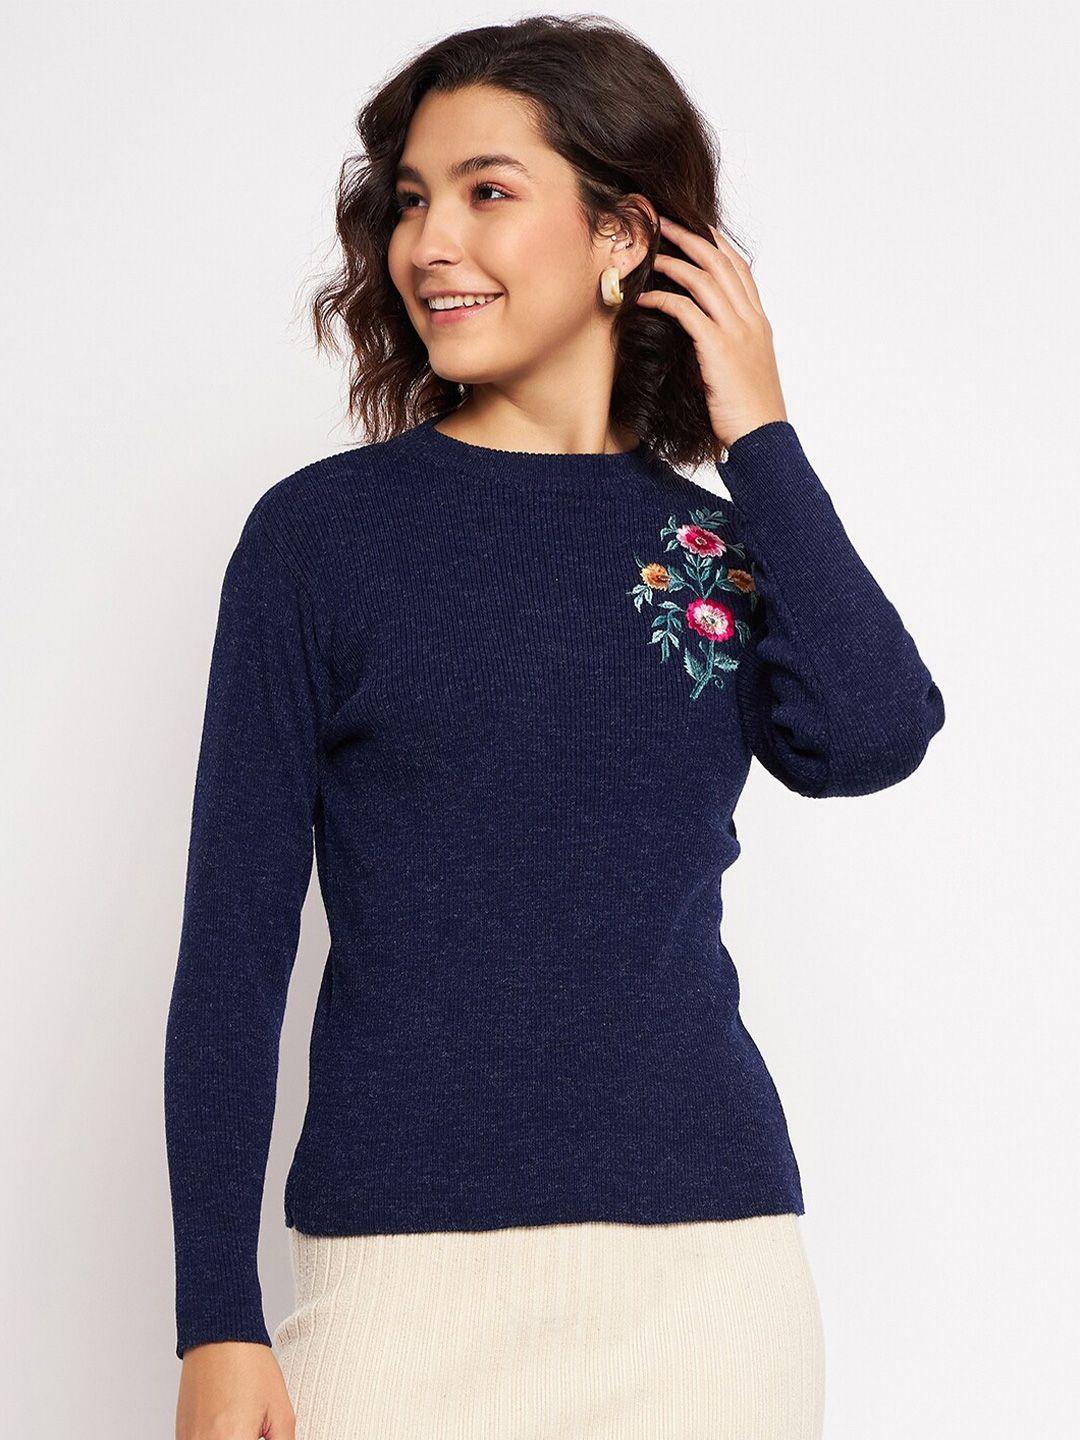 clapton-ribbed-&-floral-embroidered-detail-pullover-sweater